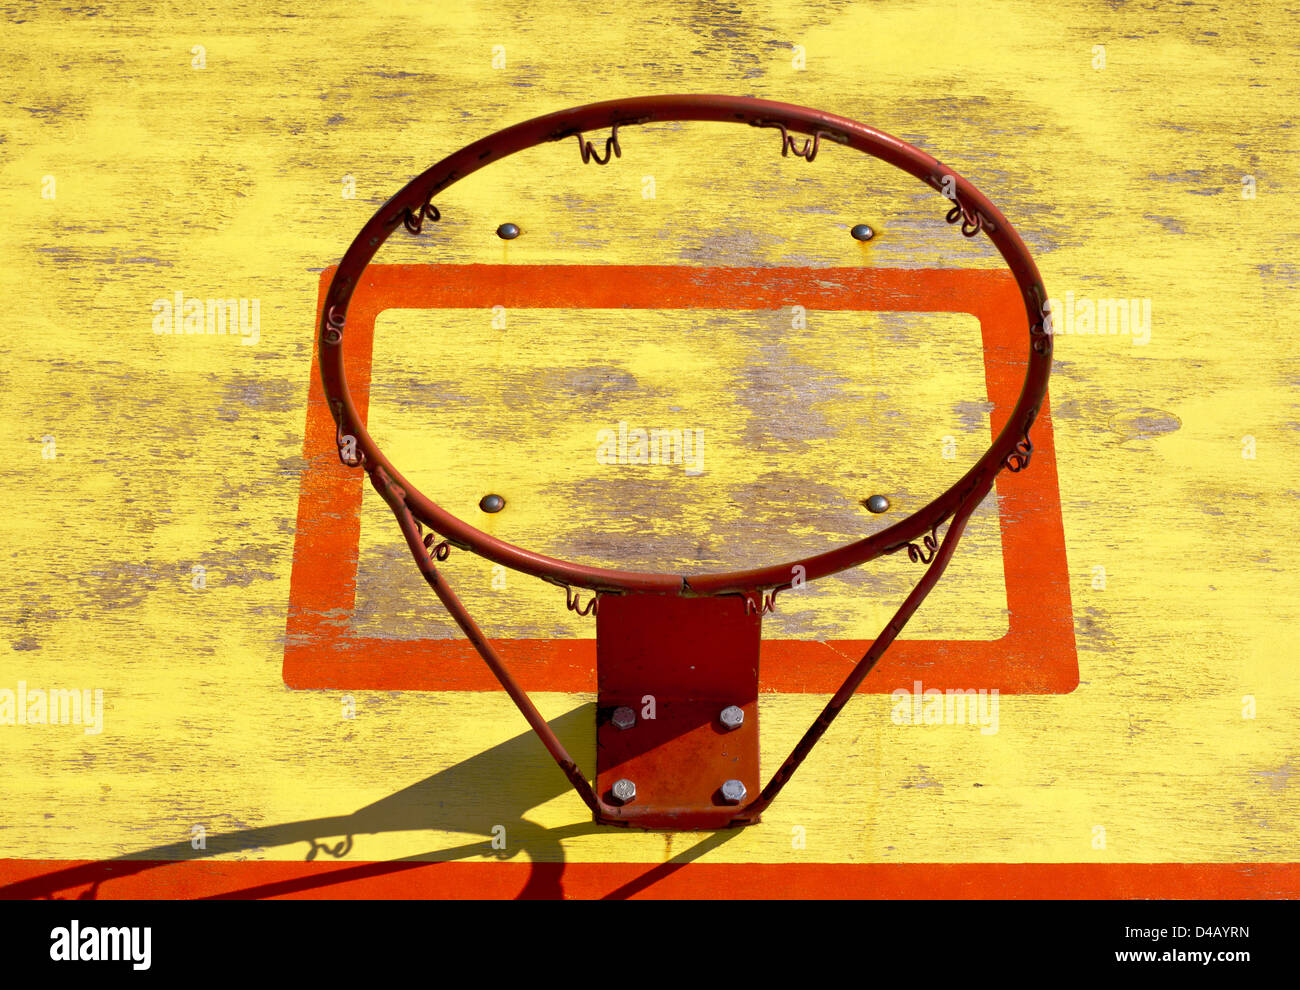 old basketball hoop without net Stock Photo